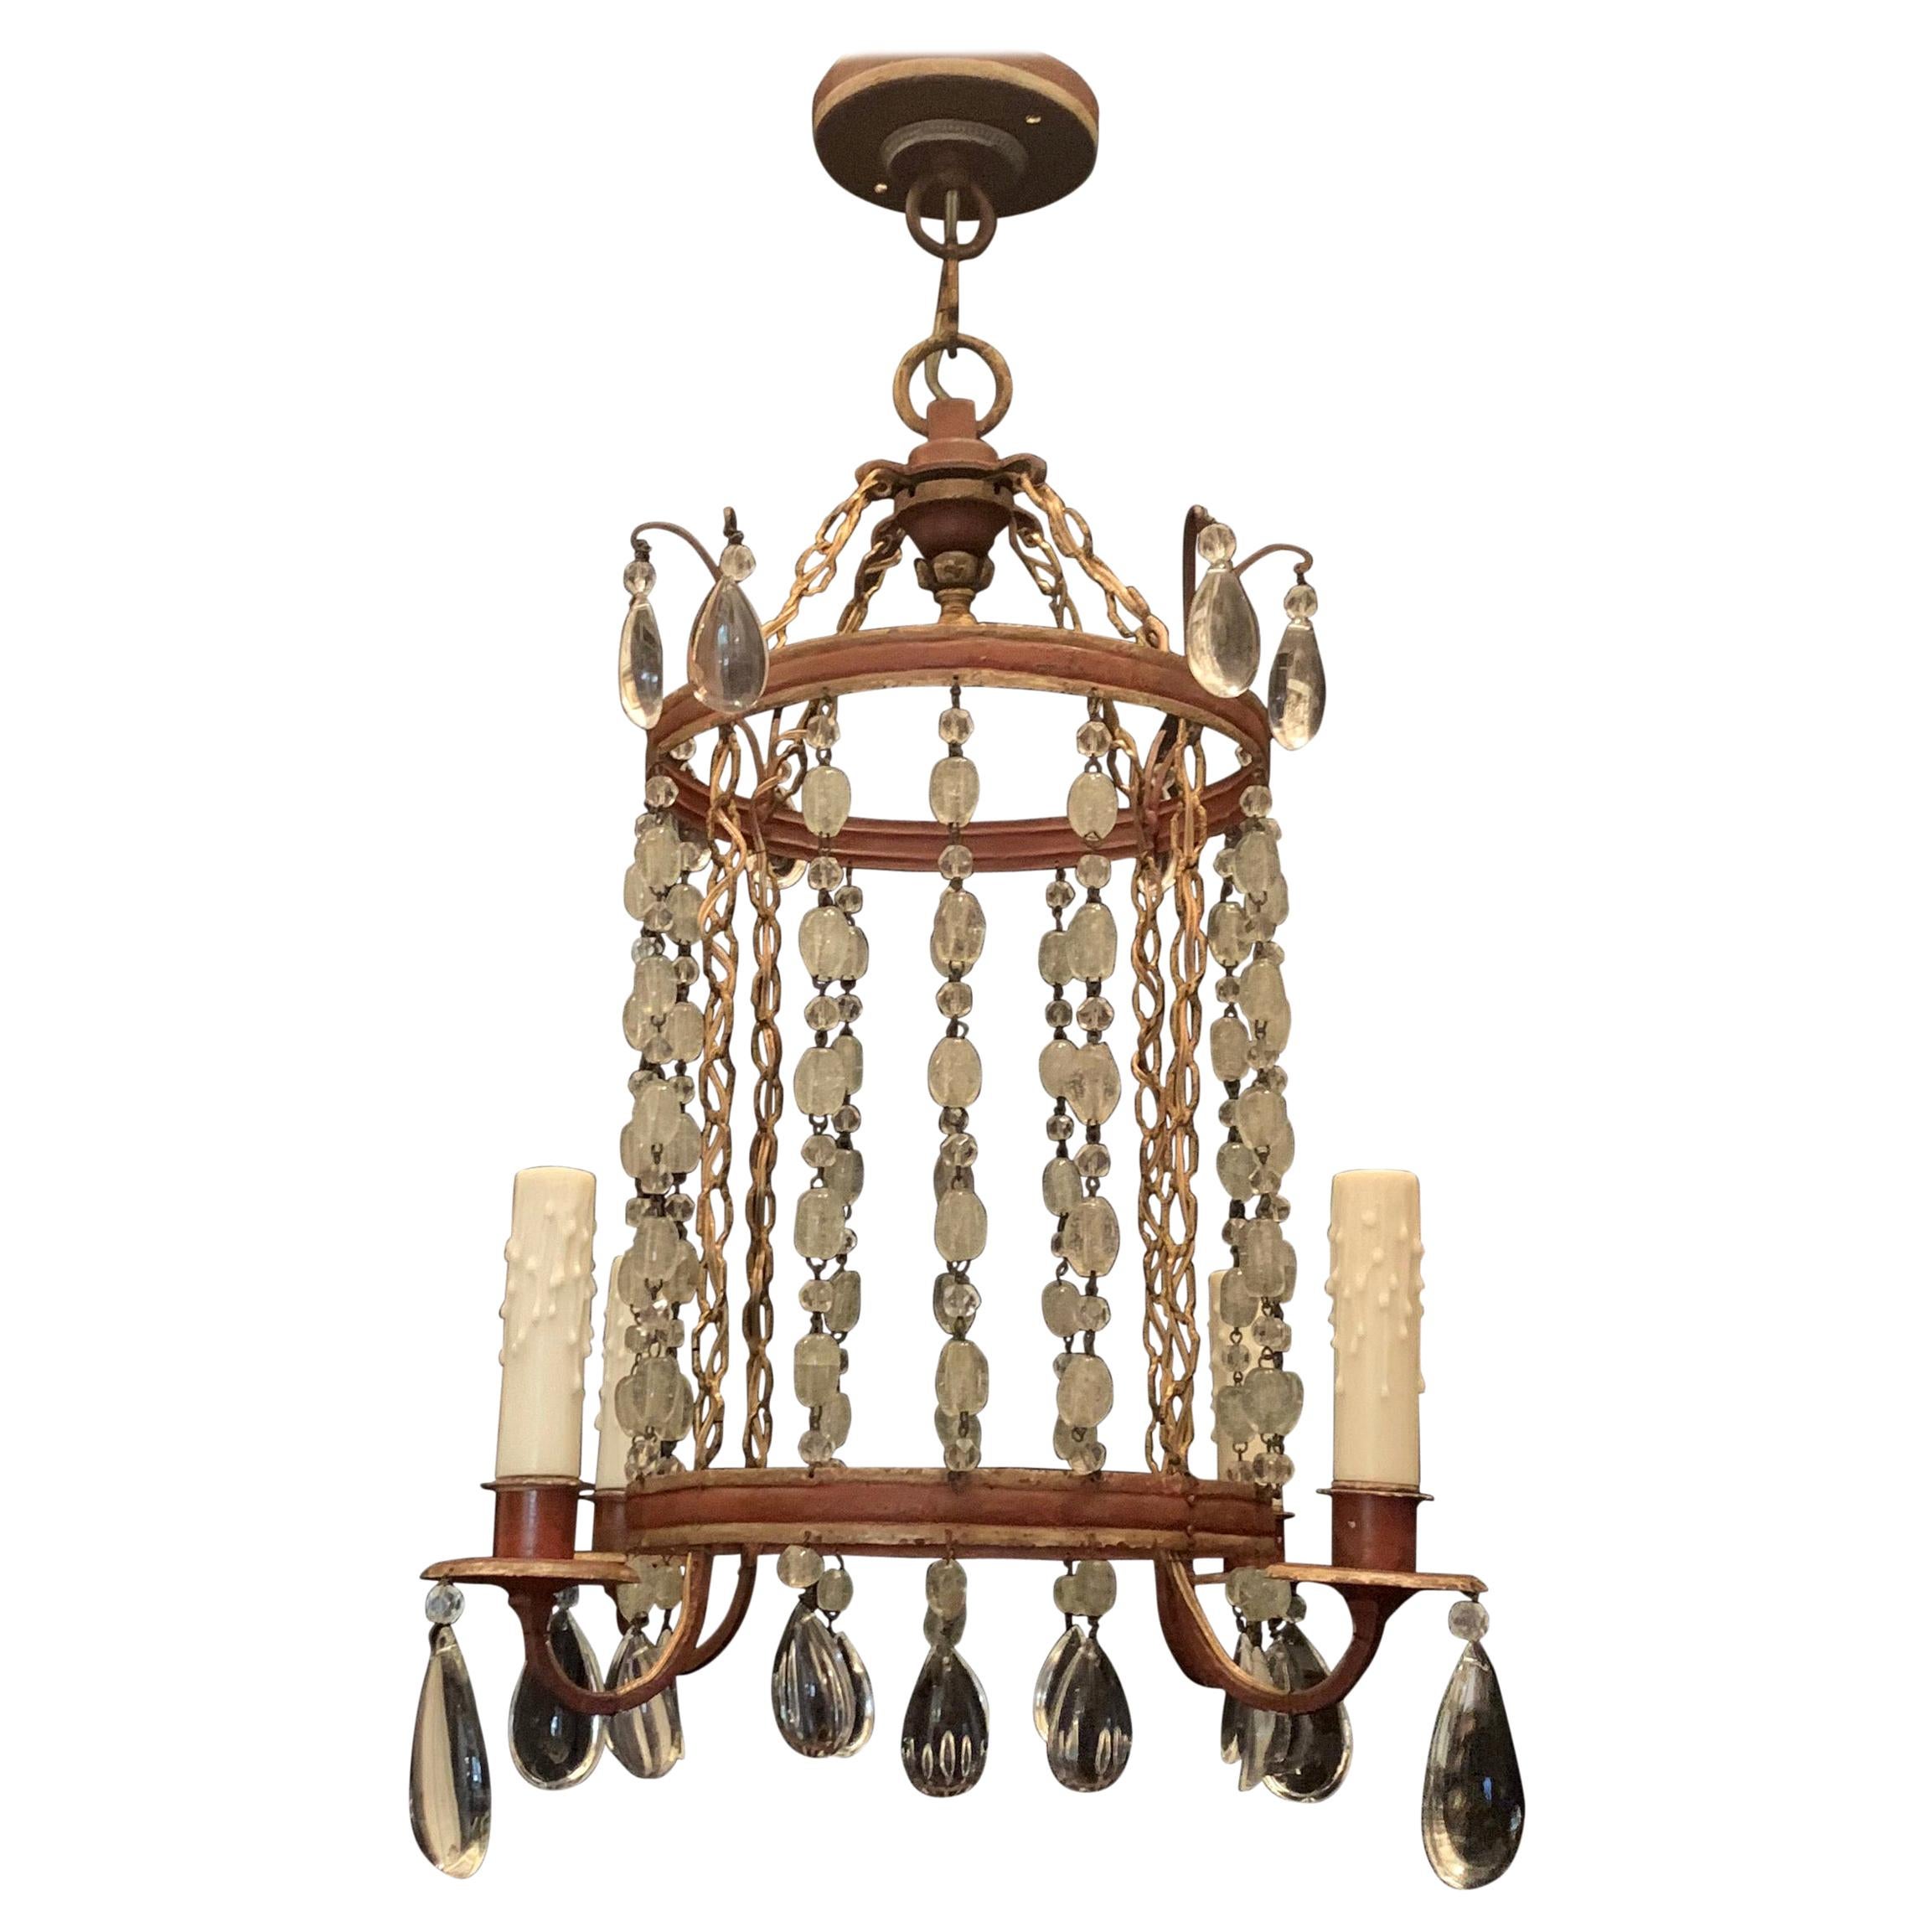 Wonderful Beaded Crystal Red Tole Gilt Pagoda Lantern Pendent Chandelier For Sale